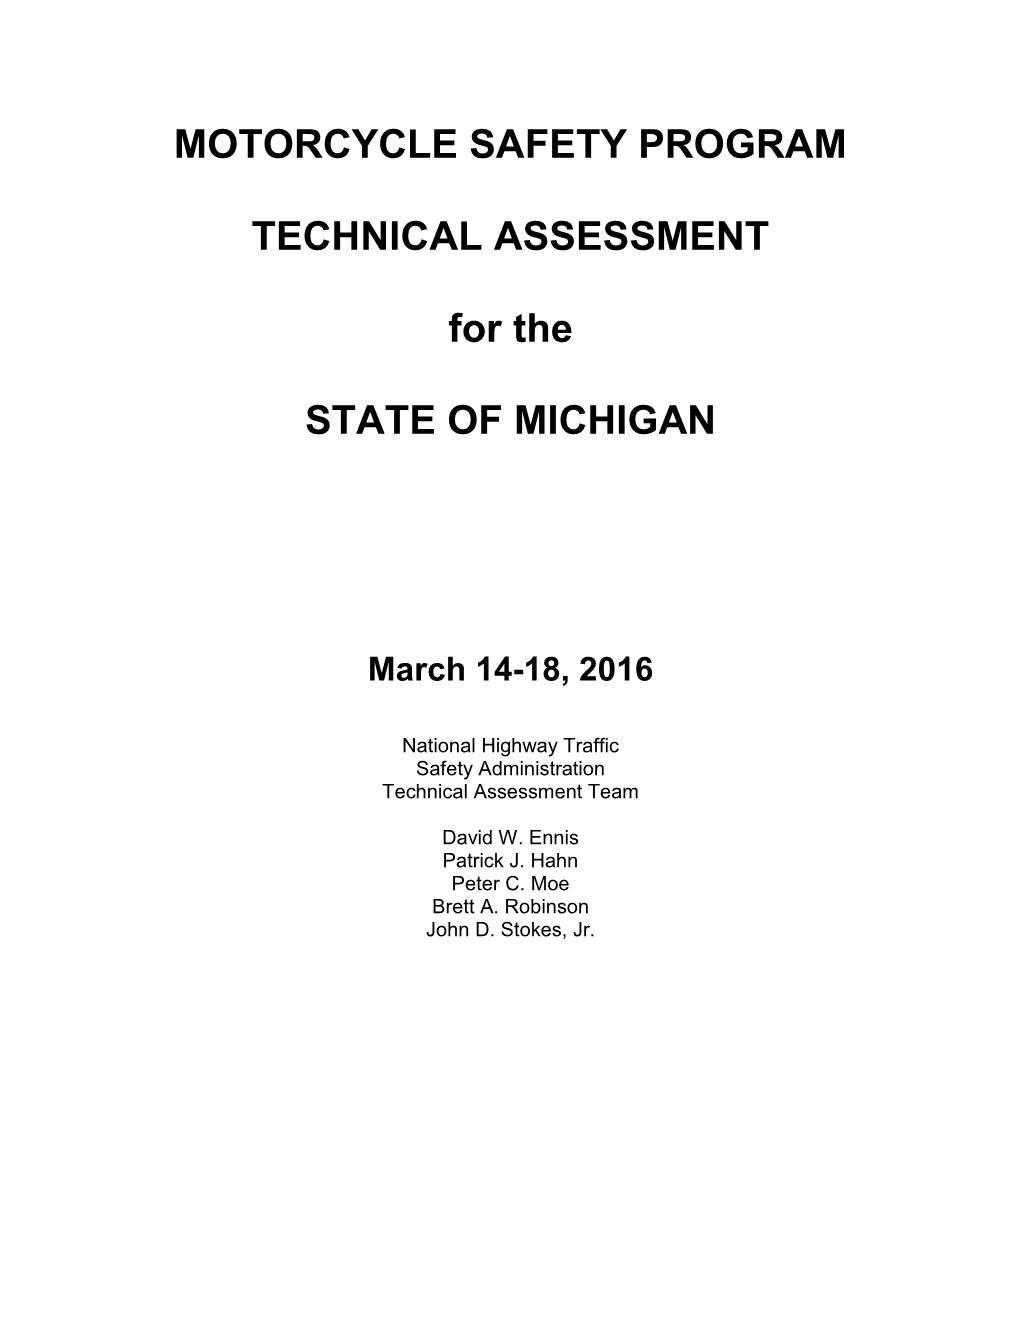 Motorcycle Safety Program Technical Assessment Draft (3/18/16) Page 2 Acknowledgments